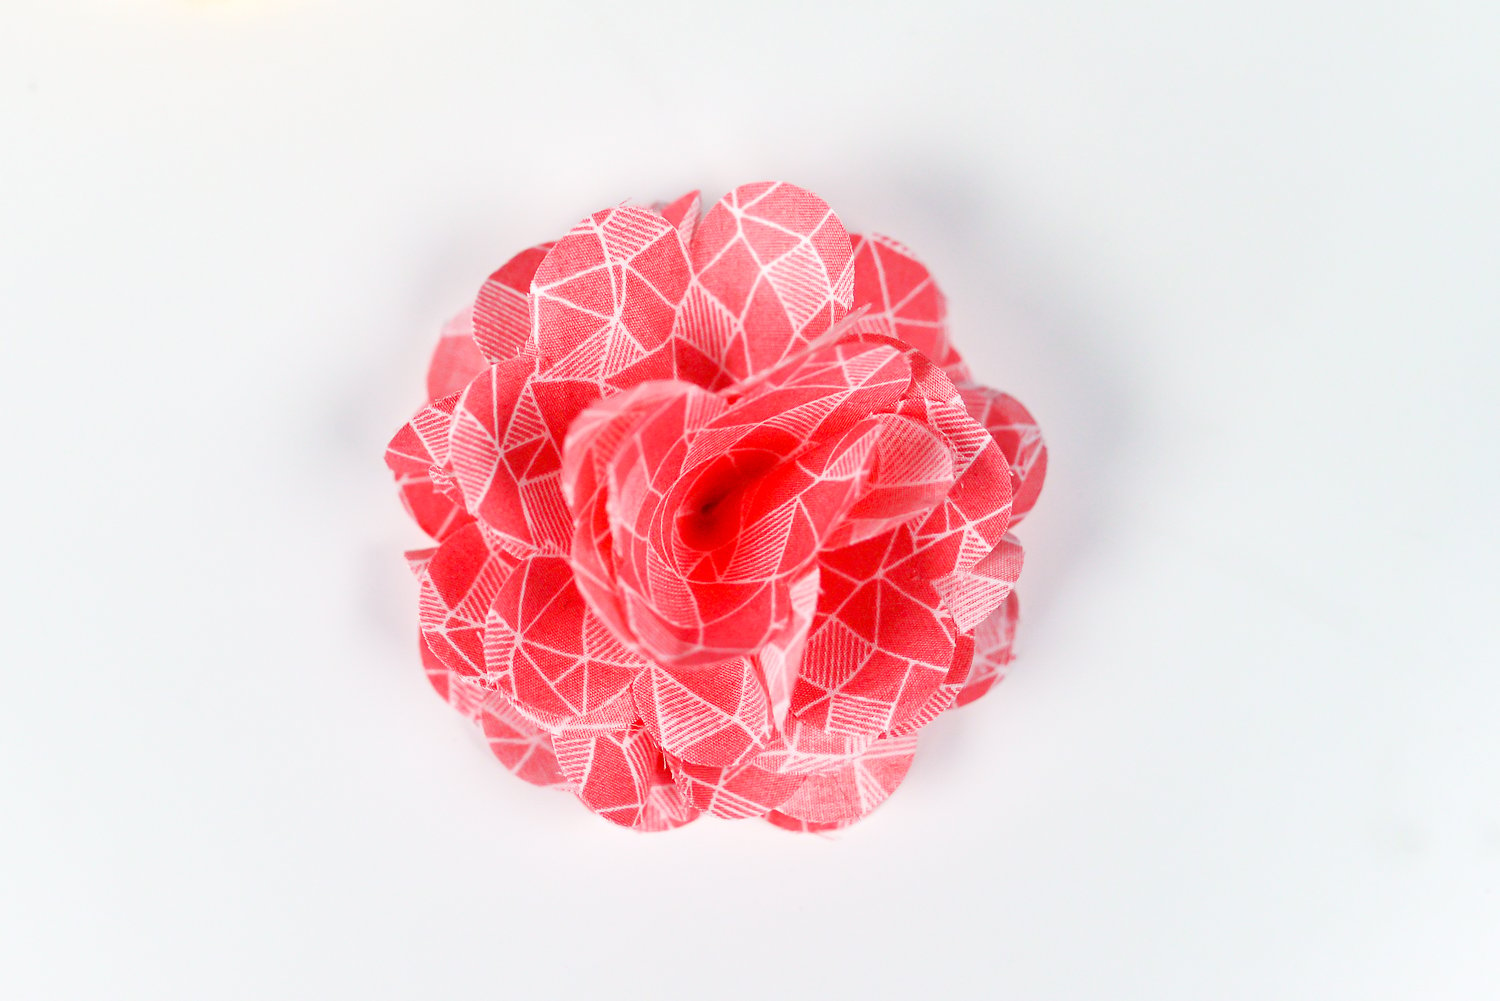 A close up of a pink paper cut out flower